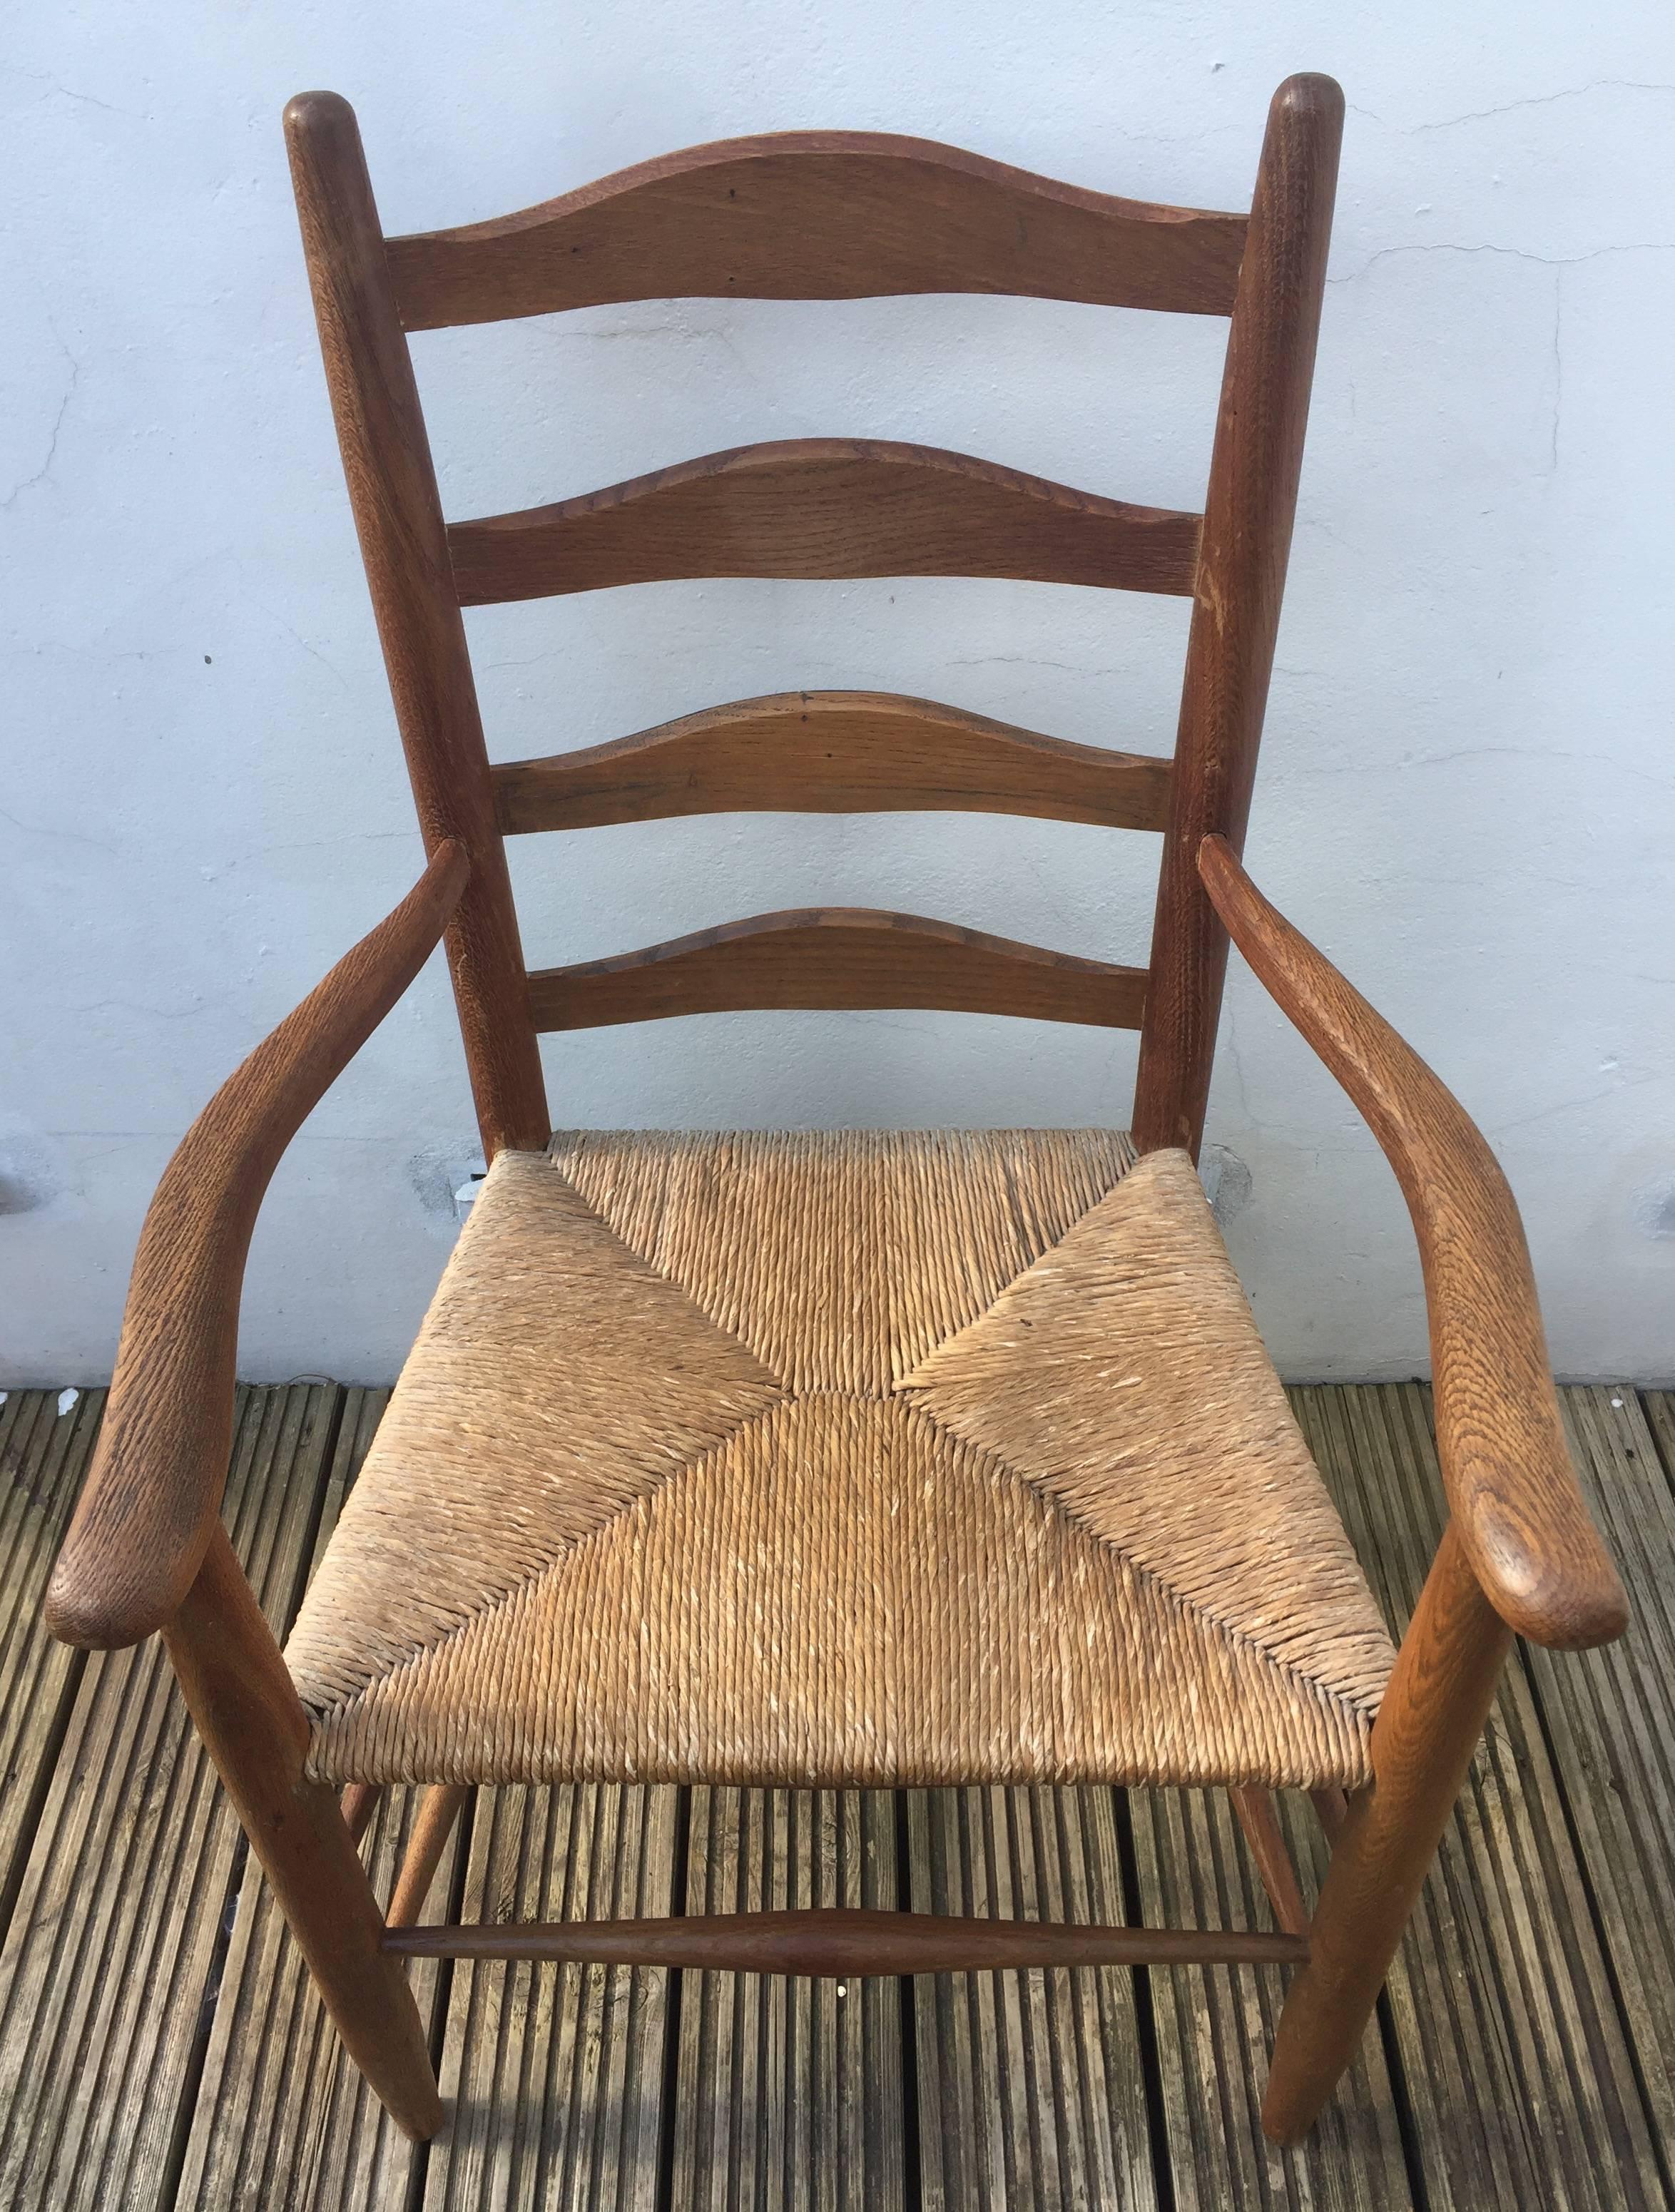 Beautifully handmade ladder back armchair of generous proportions by Ernest Gimson with rushed seat and tenon joints as well as handmade iron nails. Crisp chamfering to the graduated back rails.